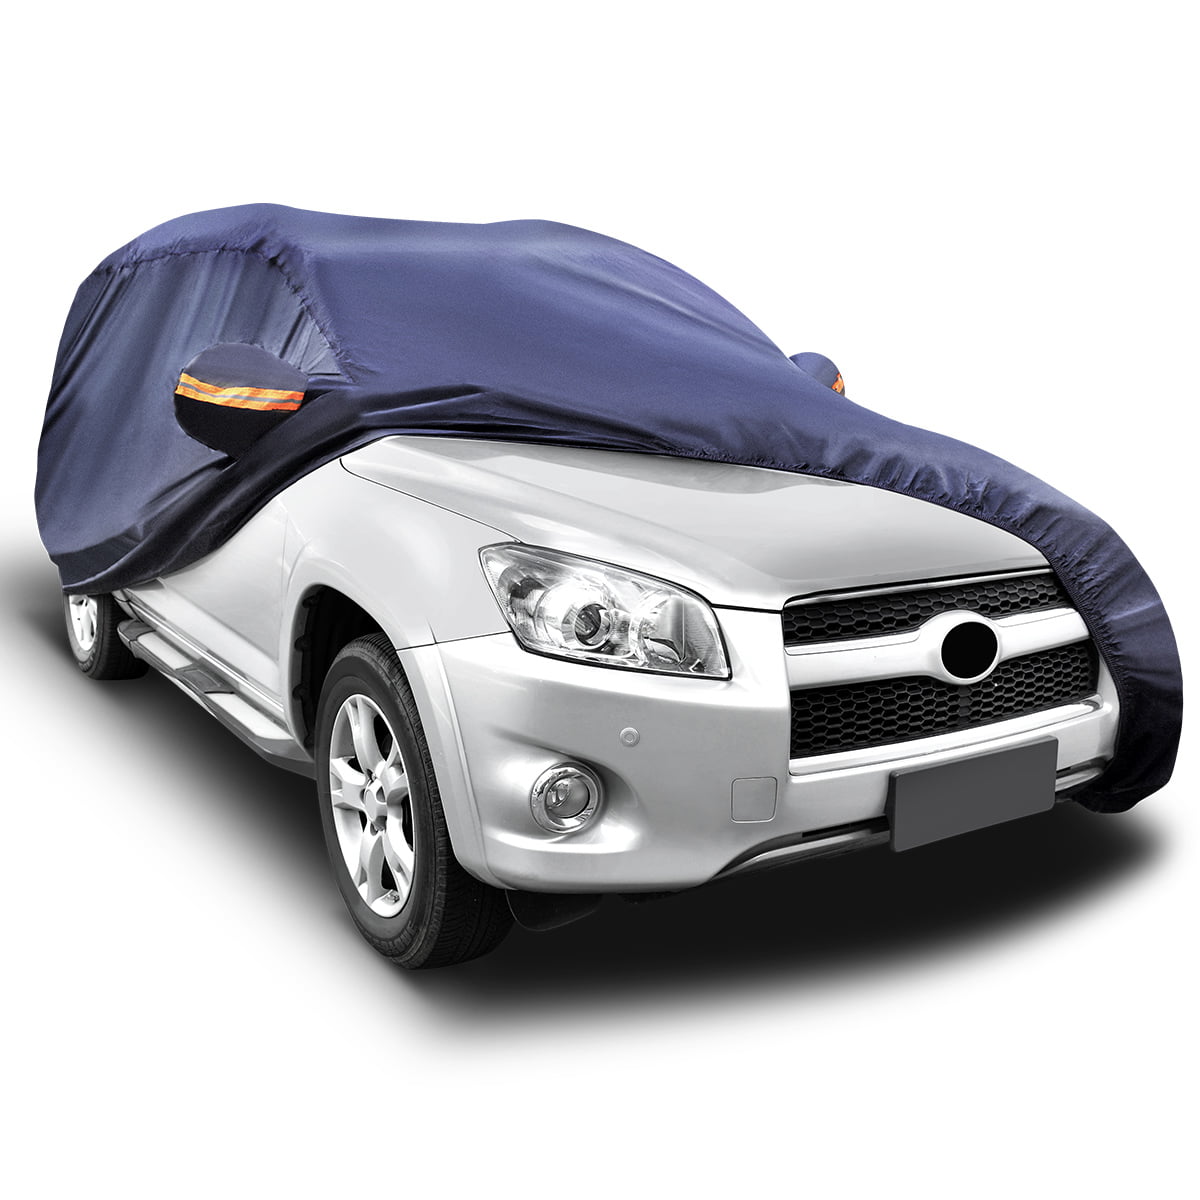 For Infiniti Fx35 6 Layer Car Cover Fitted Water Proof Outdoor Rain Snow Uv Dust